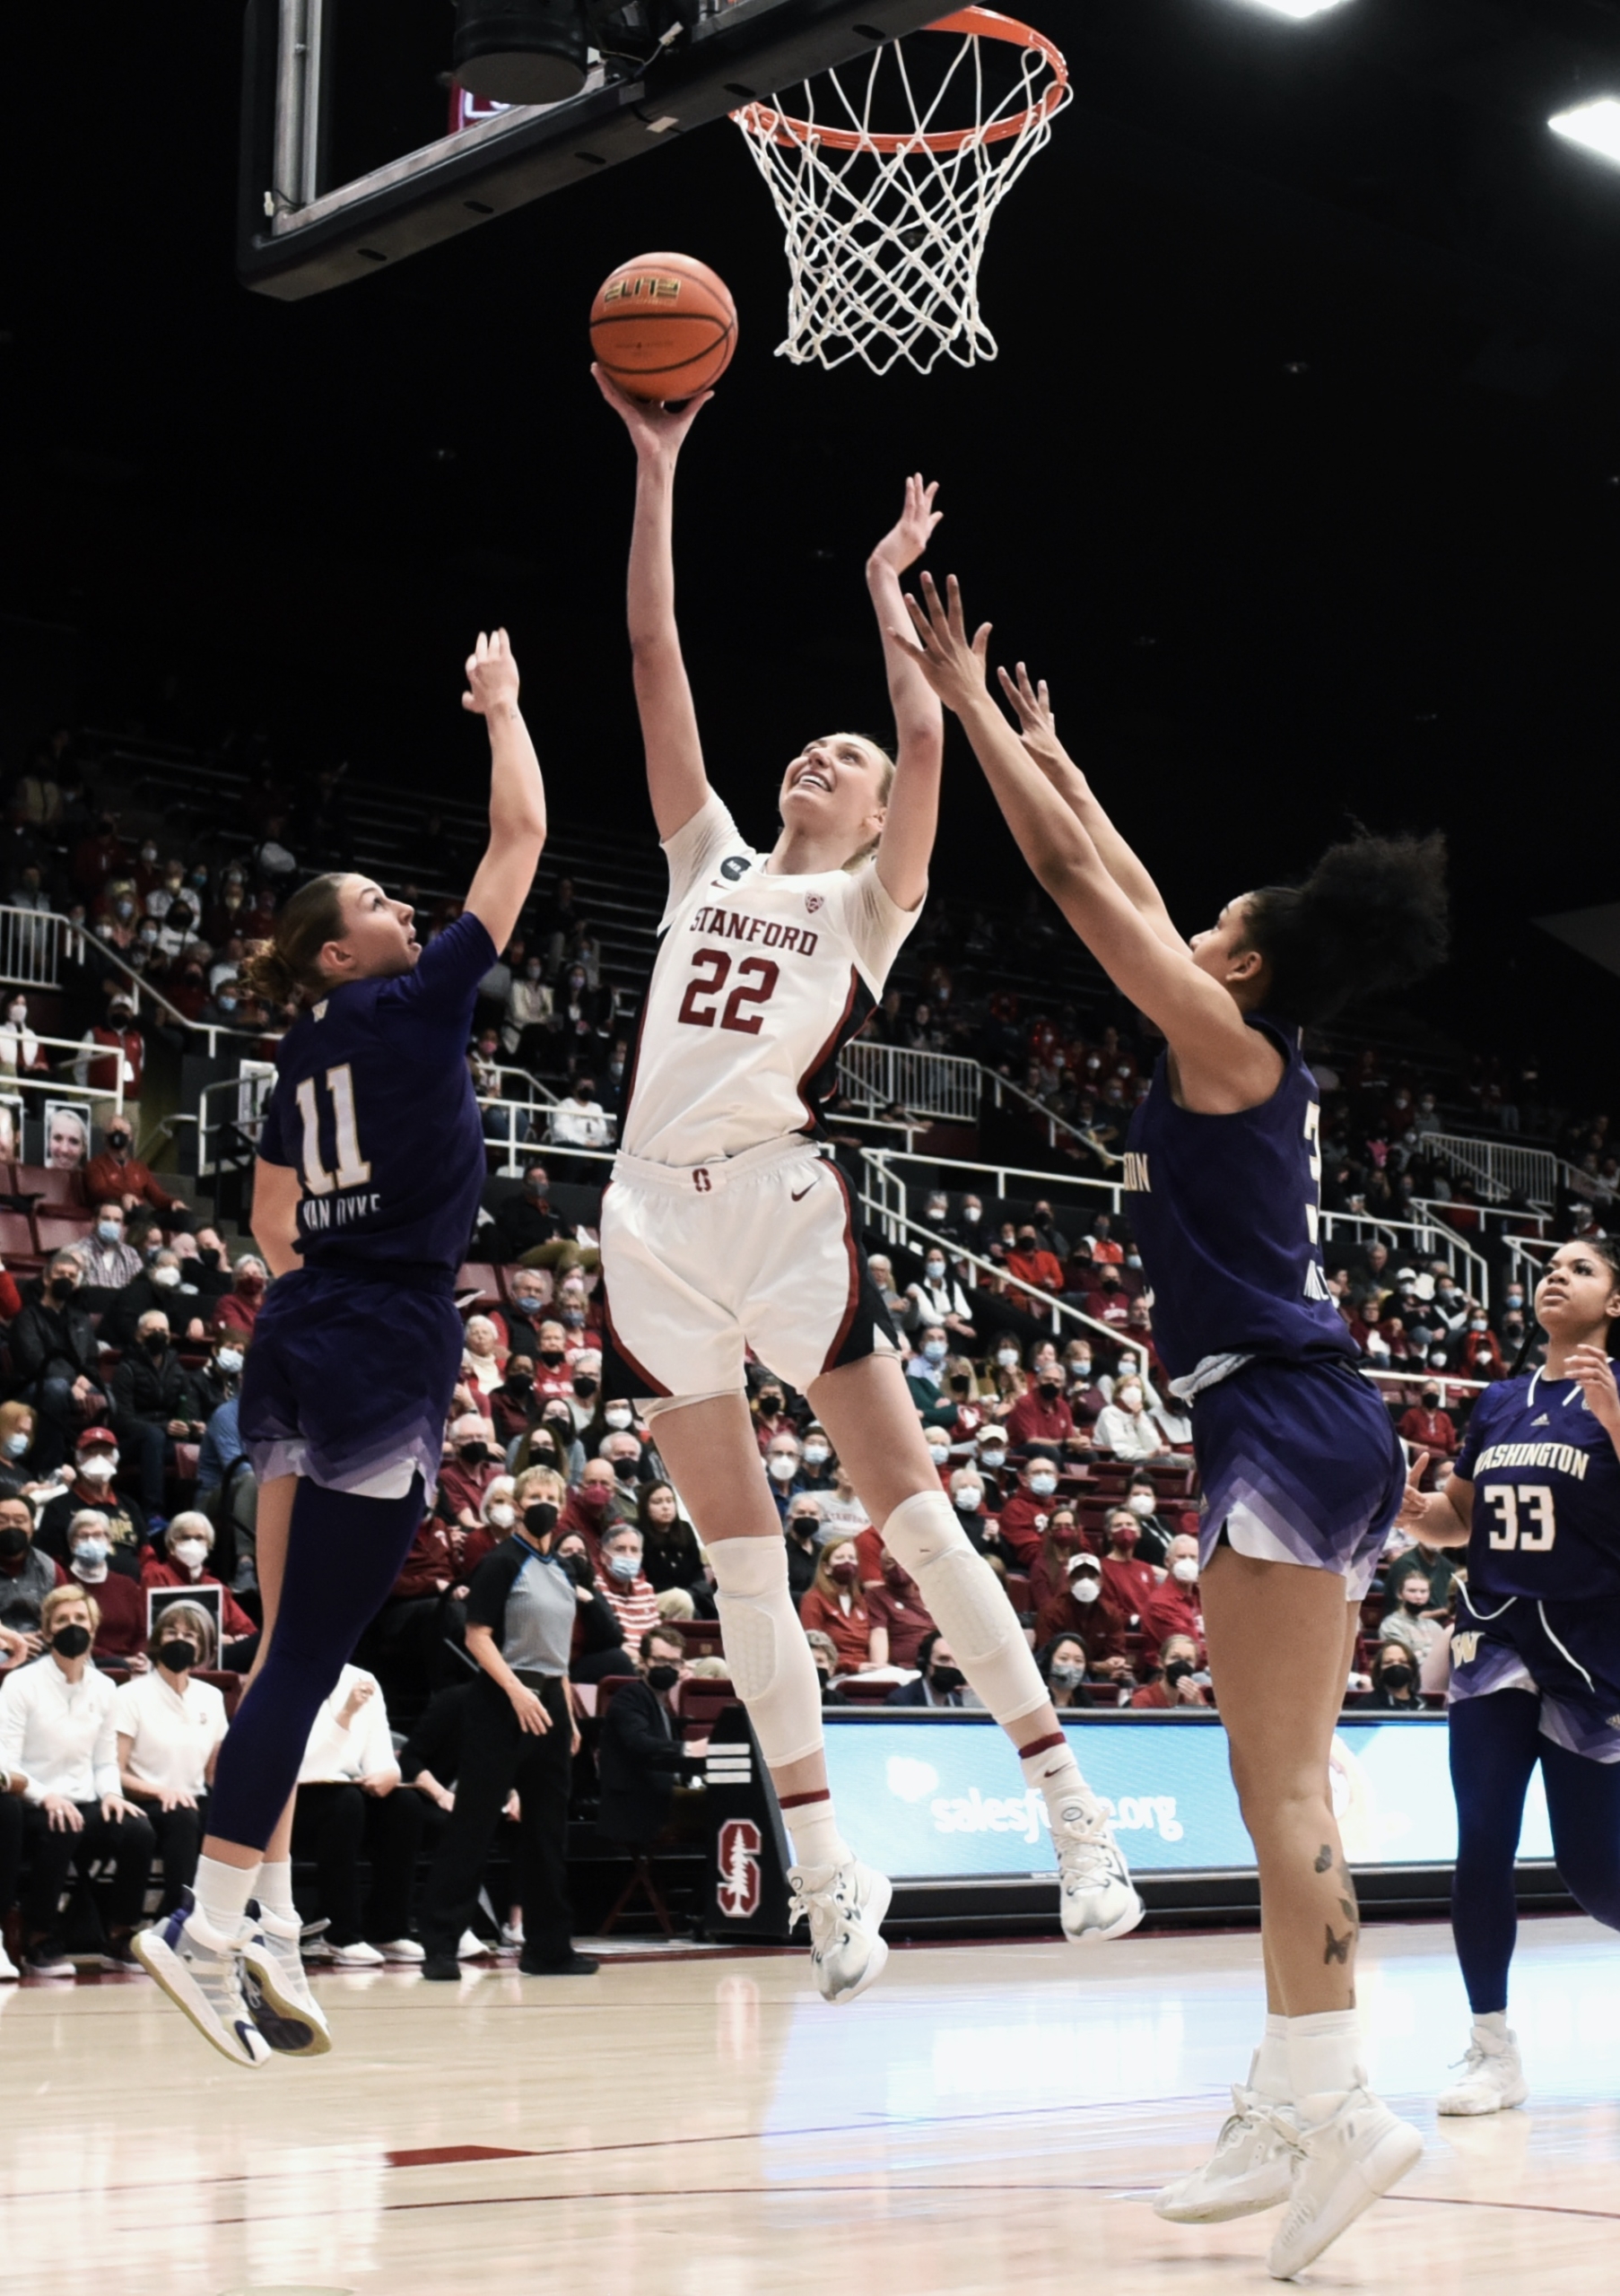 Cameron Brink and Anna Wilson help No. 2 Stanford hold off Washington 63-56; Cardinal finish Pac-12 play undefeated